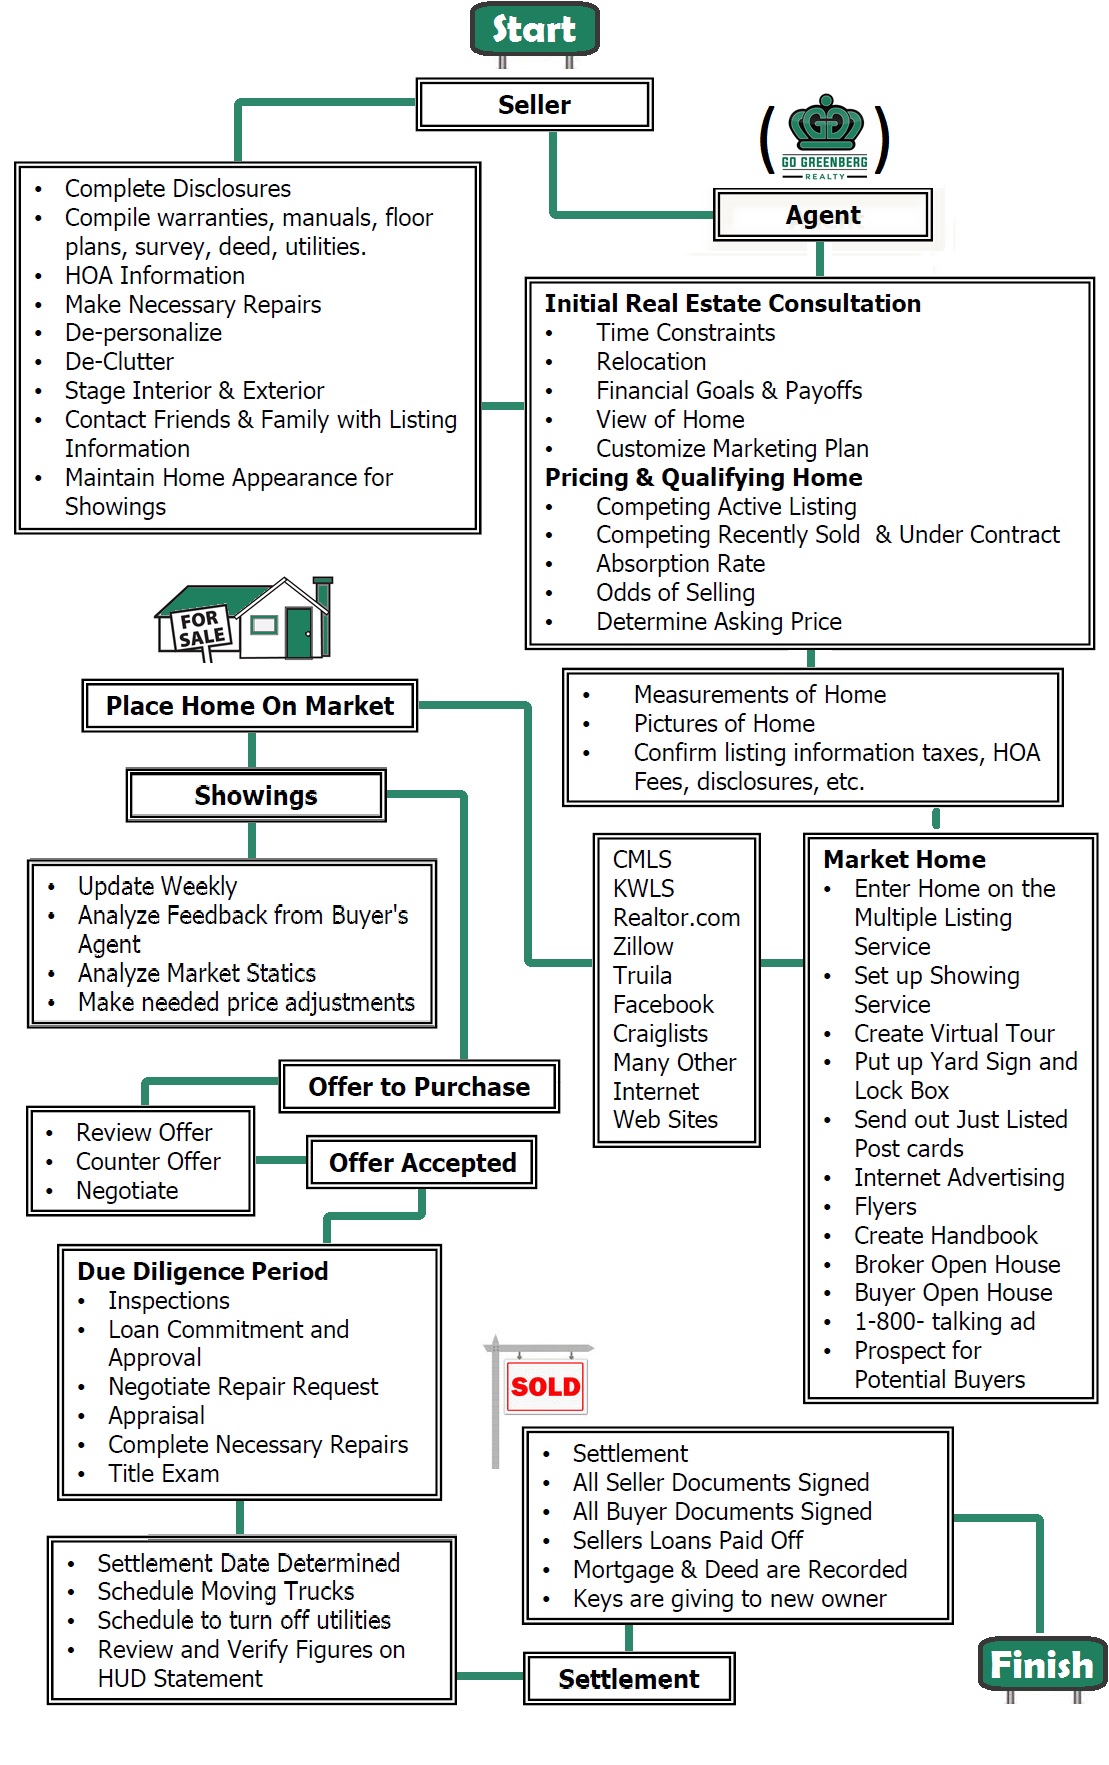 Contract To Close Flow Chart